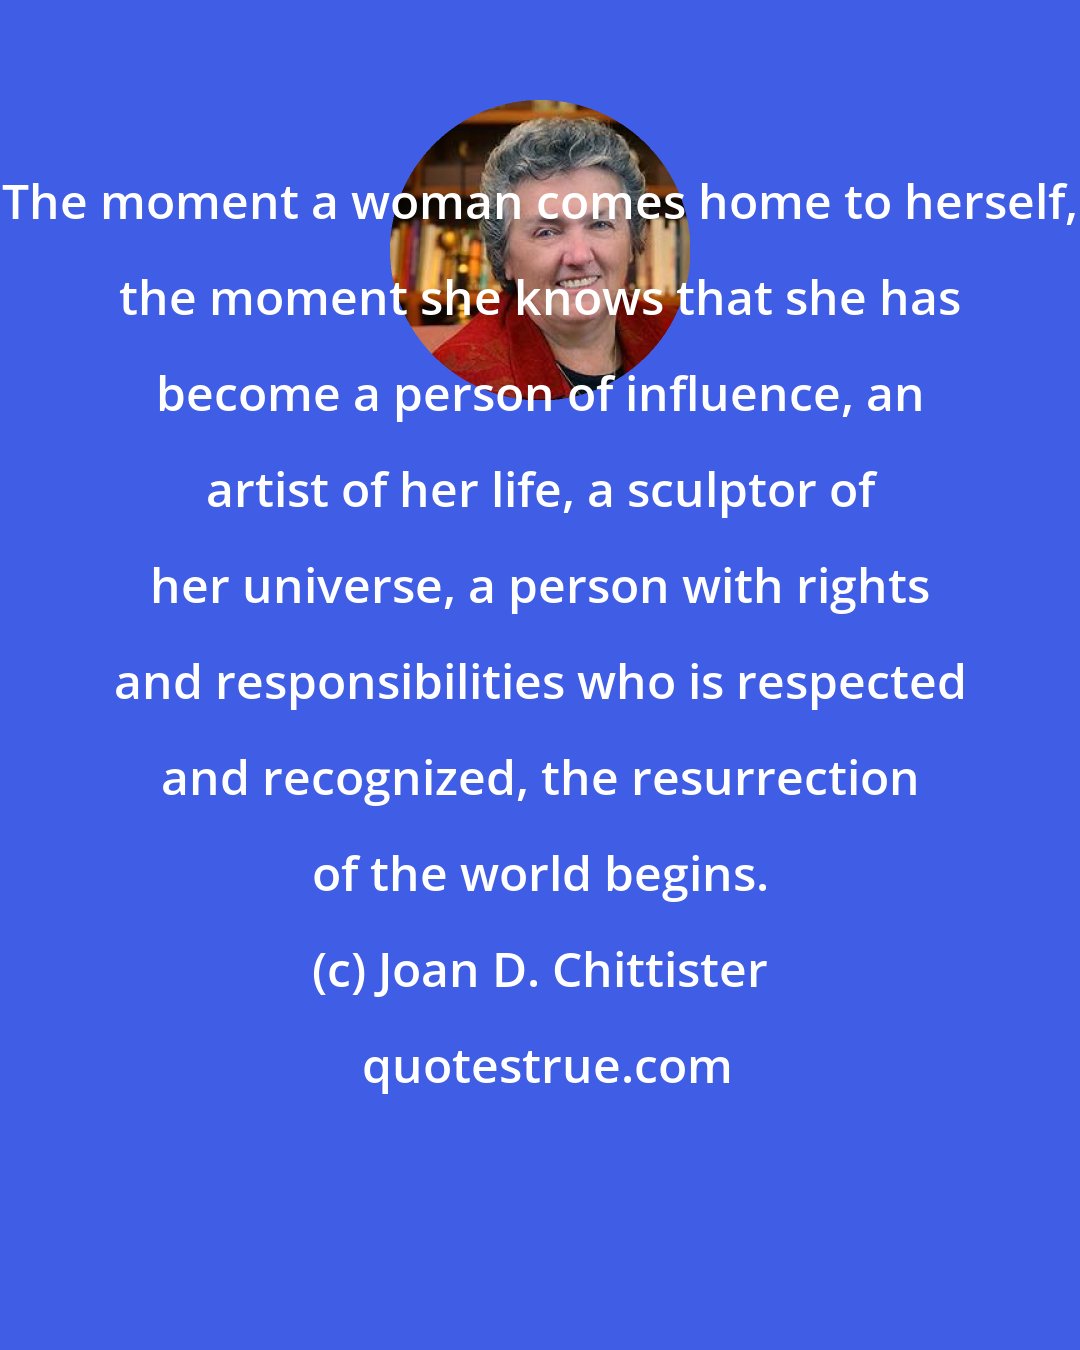 Joan D. Chittister: The moment a woman comes home to herself, the moment she knows that she has become a person of influence, an artist of her life, a sculptor of her universe, a person with rights and responsibilities who is respected and recognized, the resurrection of the world begins.